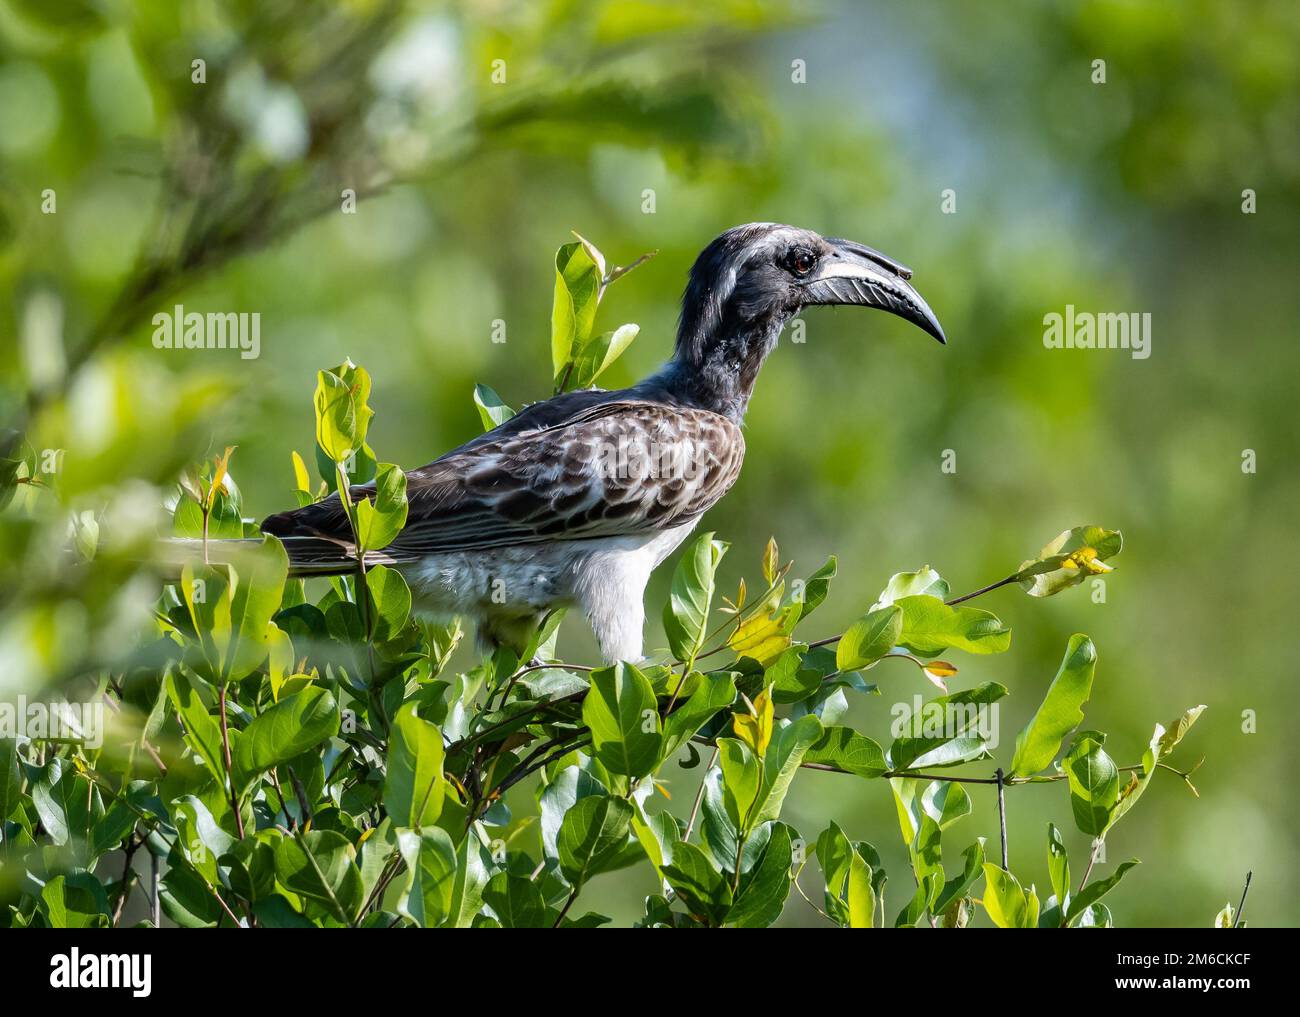 An African Gray Hornbill (Lophoceros nasutus) perched on top of a green bush. Kruger National Park, South Africa. Stock Photo